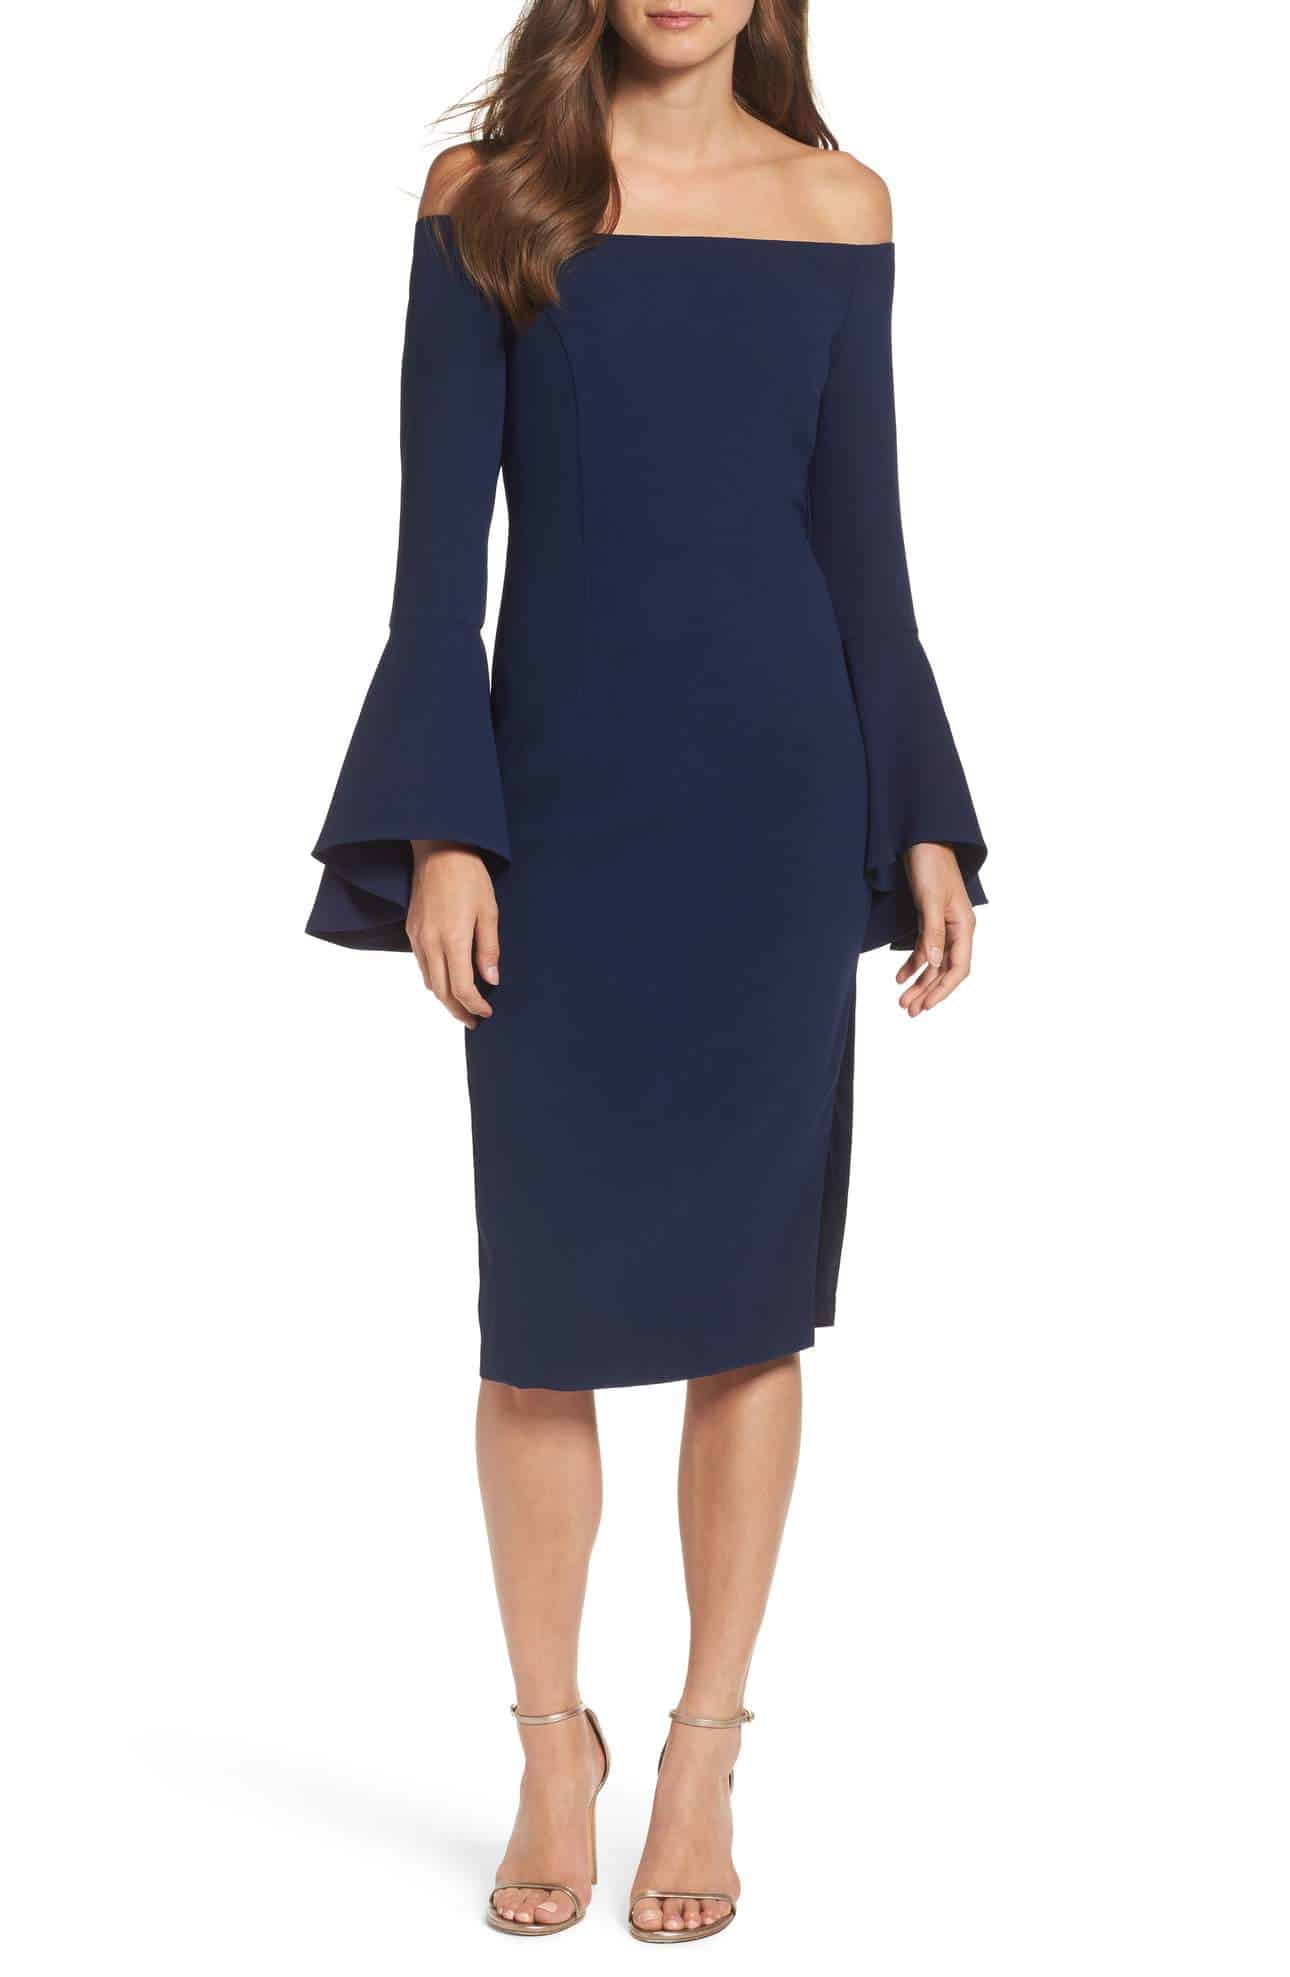 chic navy dress for a wedding